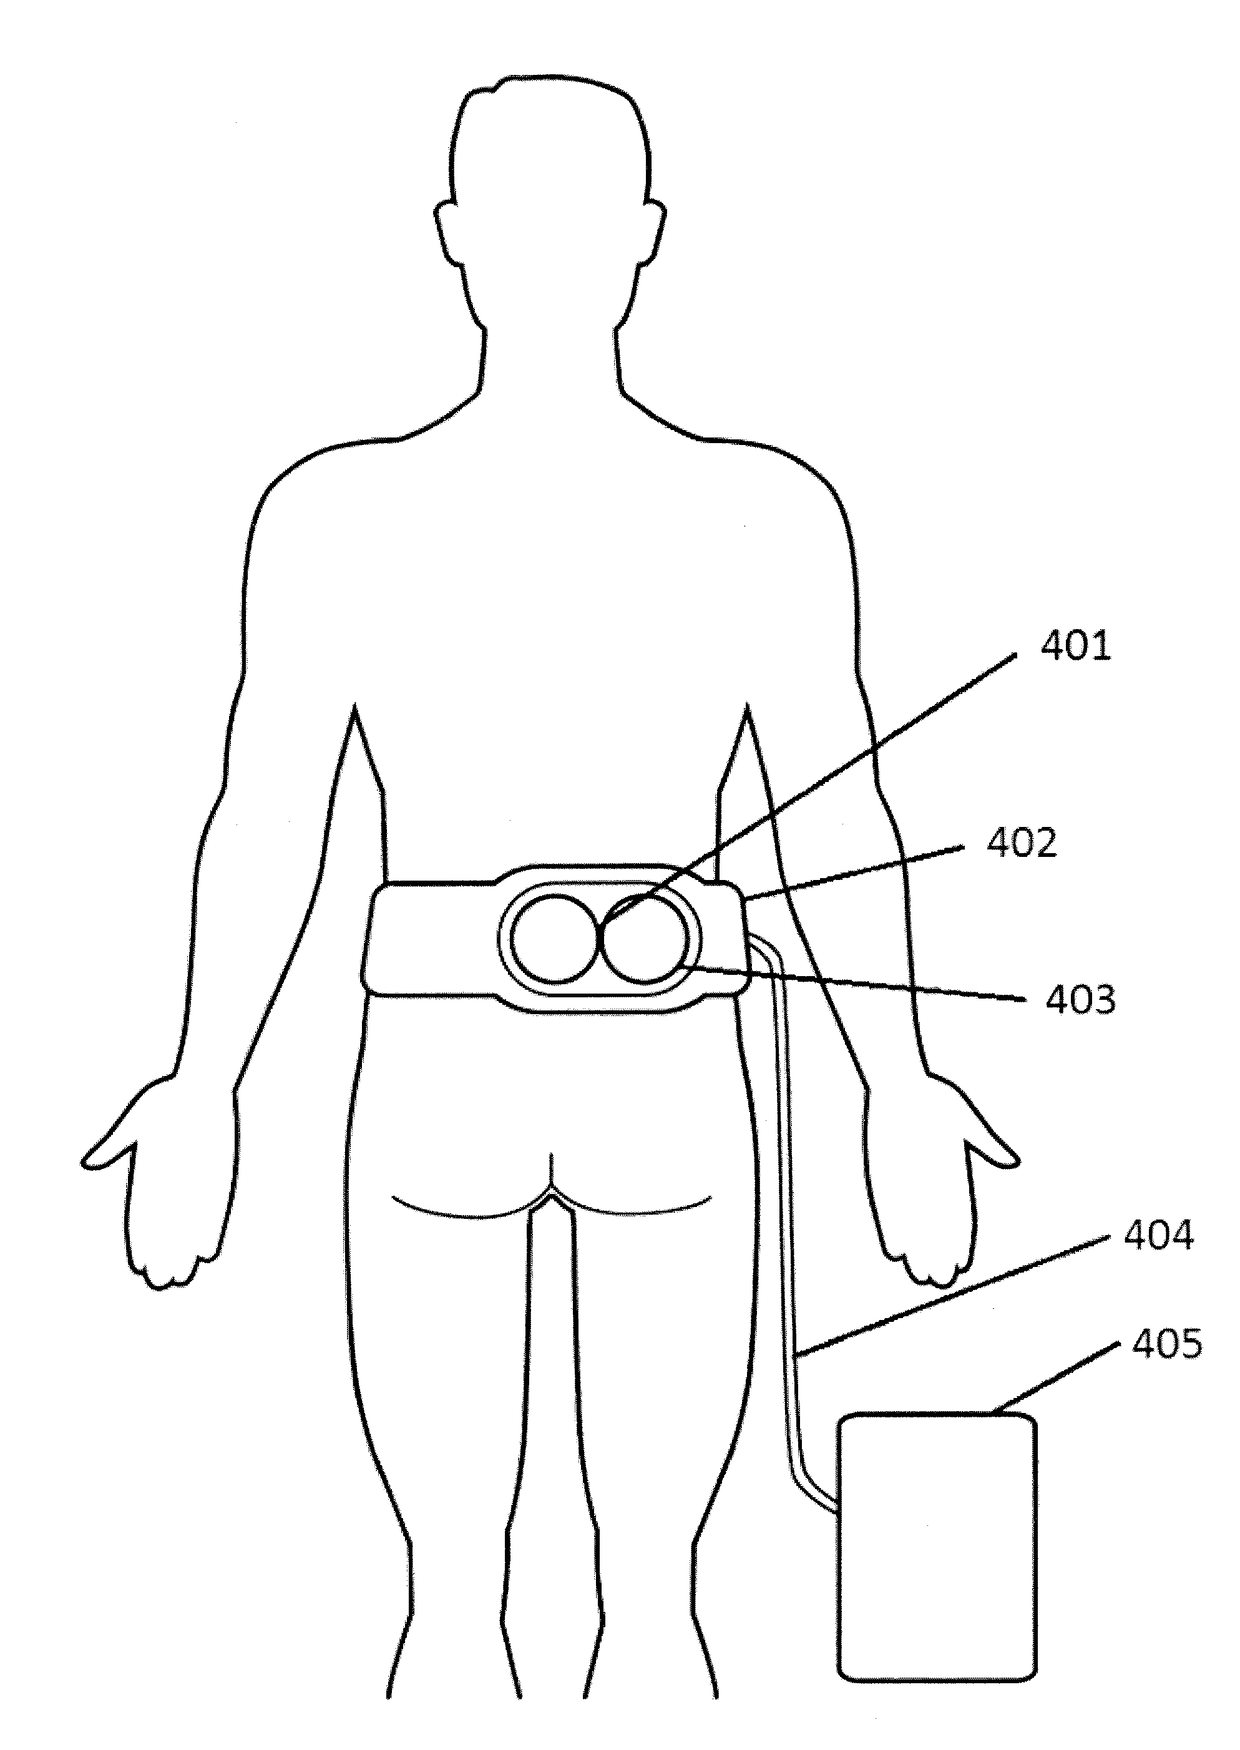 Systems and methods for spasticity treatment using spinal nerve magnetic stimulation